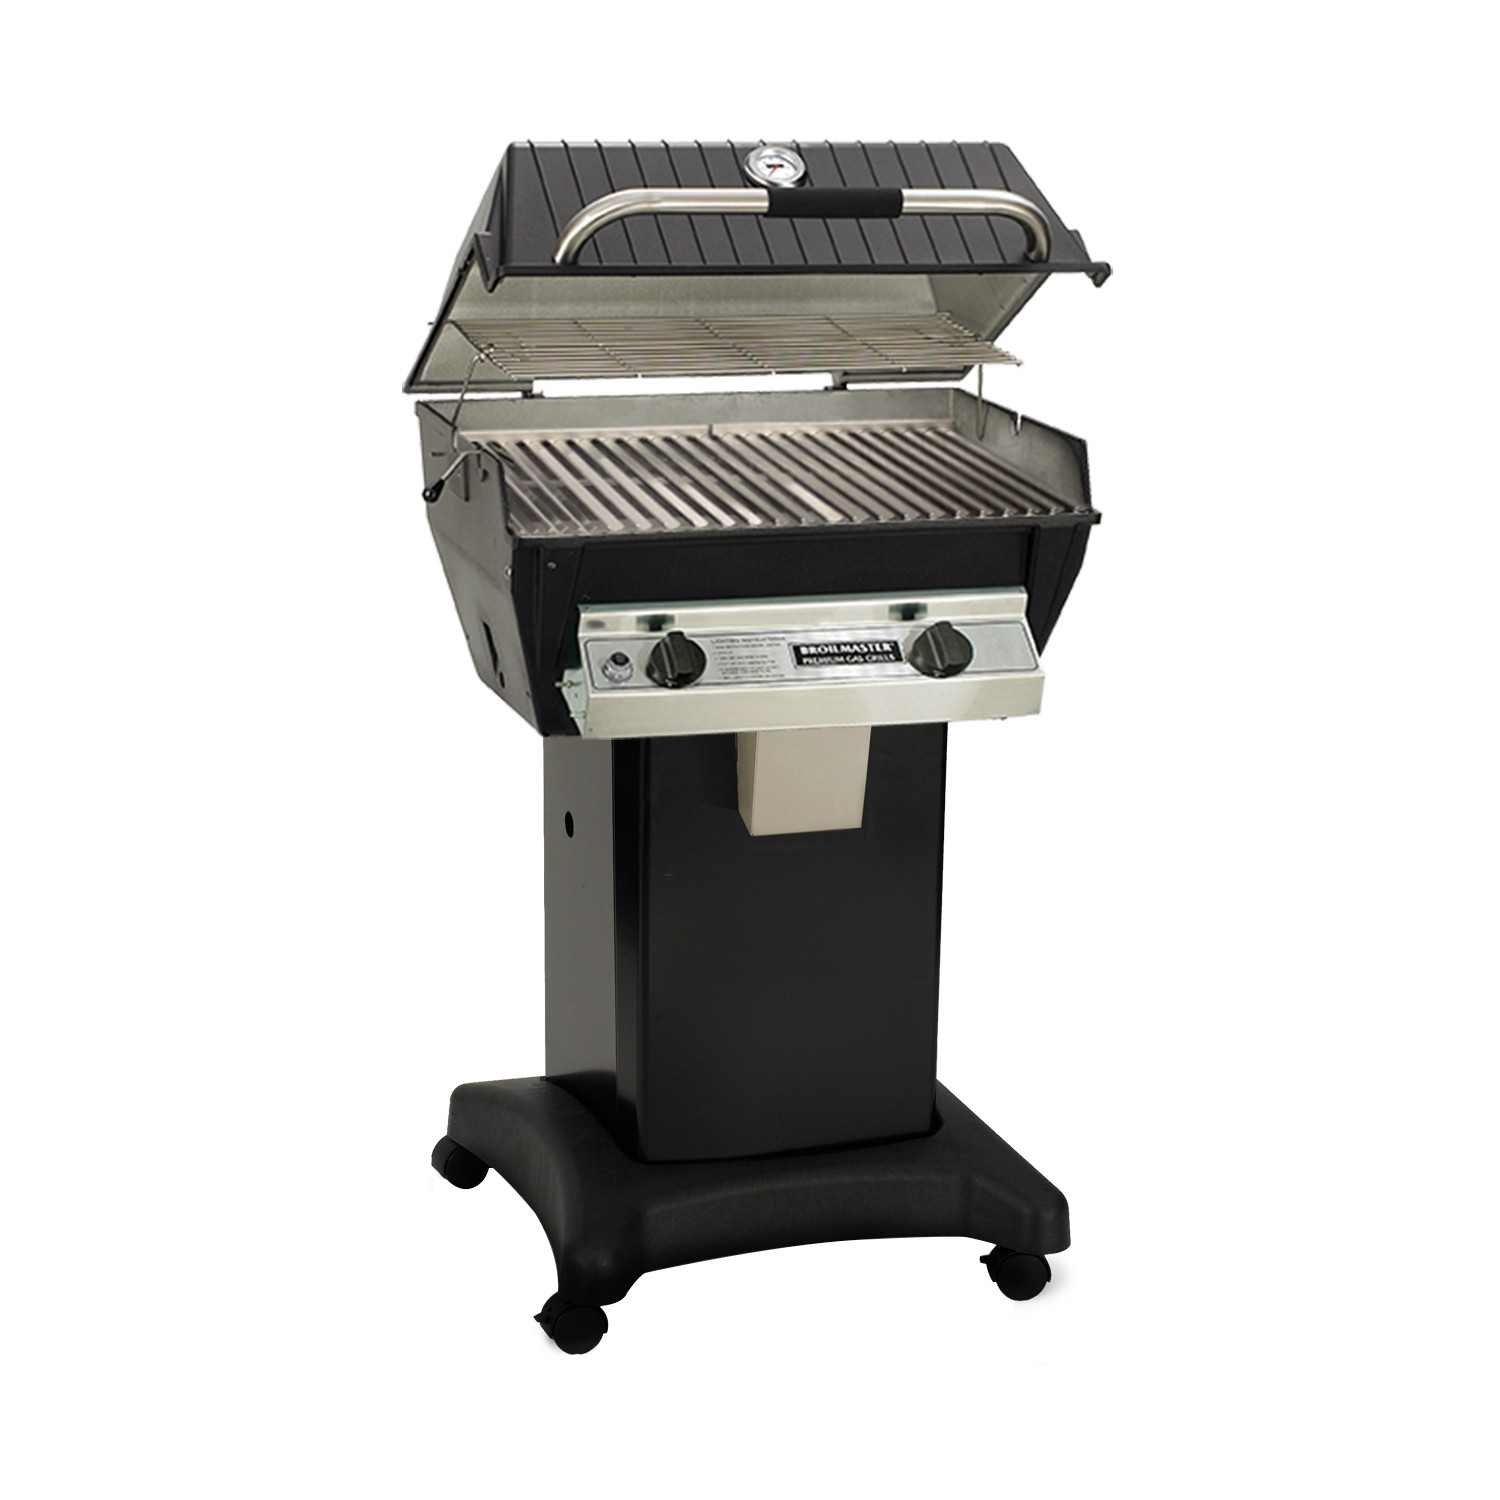 BROILMASTER R3 INFRARED SERIES PROPANE GAS GRILL - BLACK